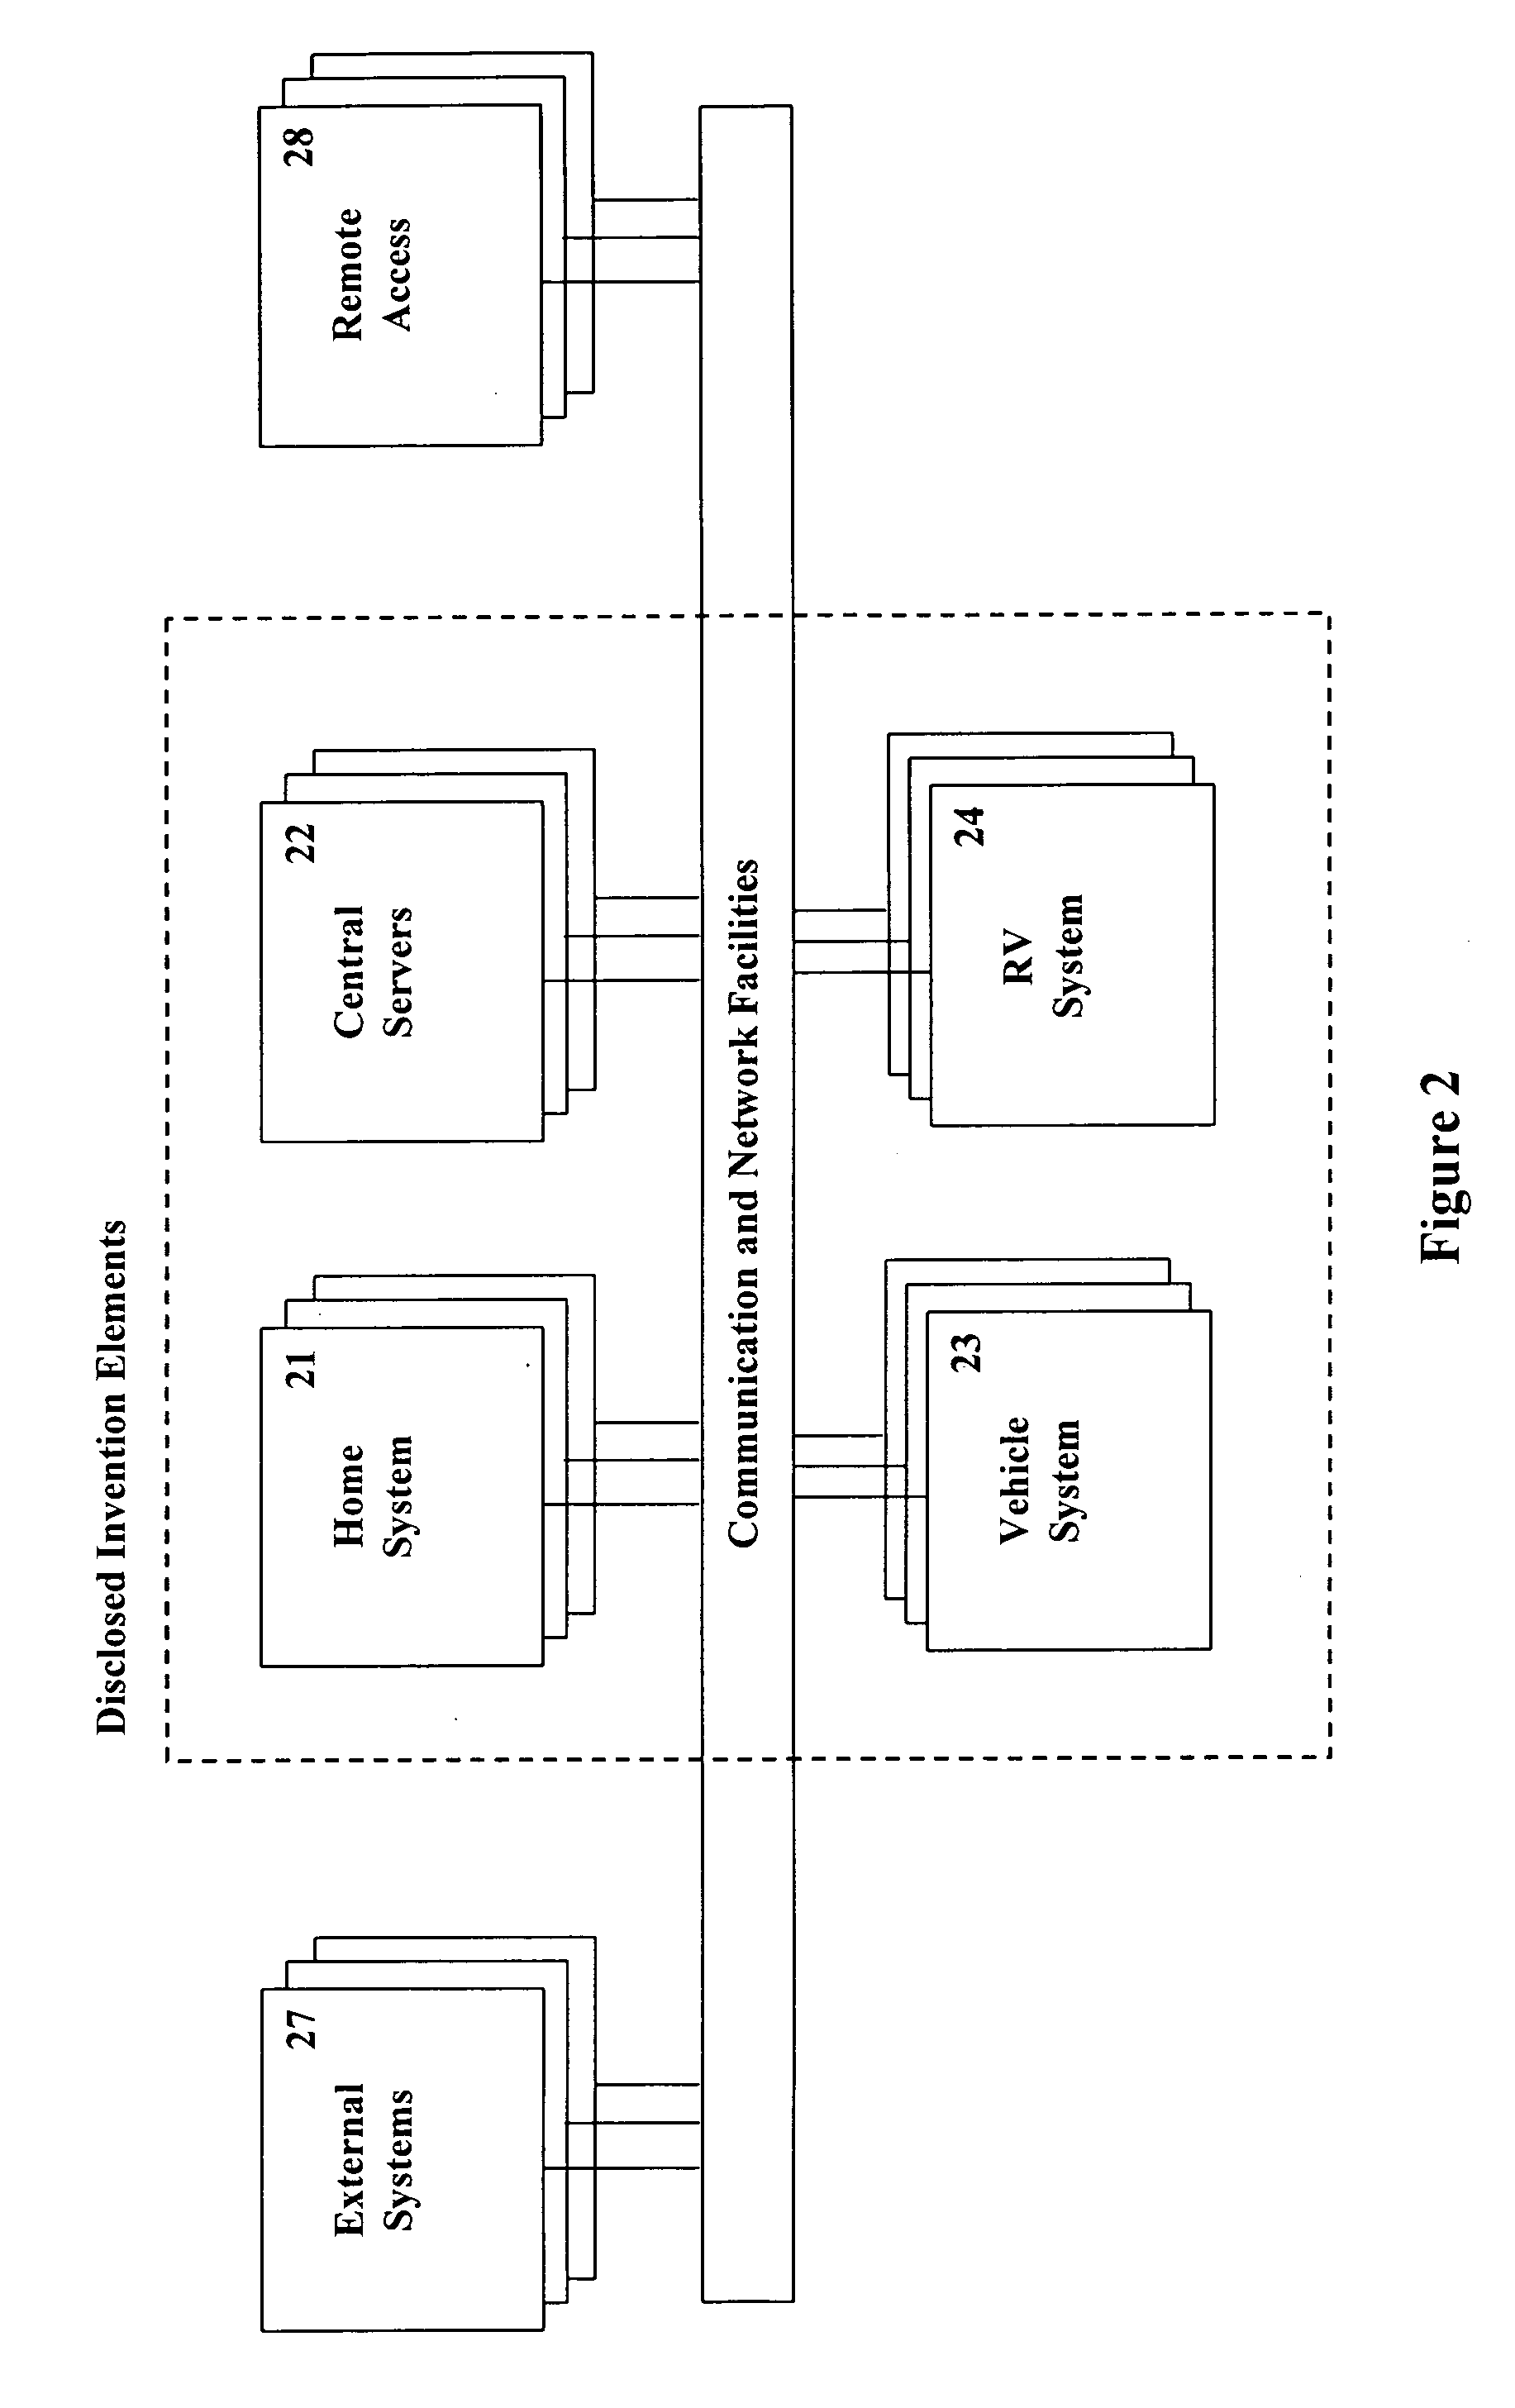 Methods and systems for automating the control of objects within a defined human environment